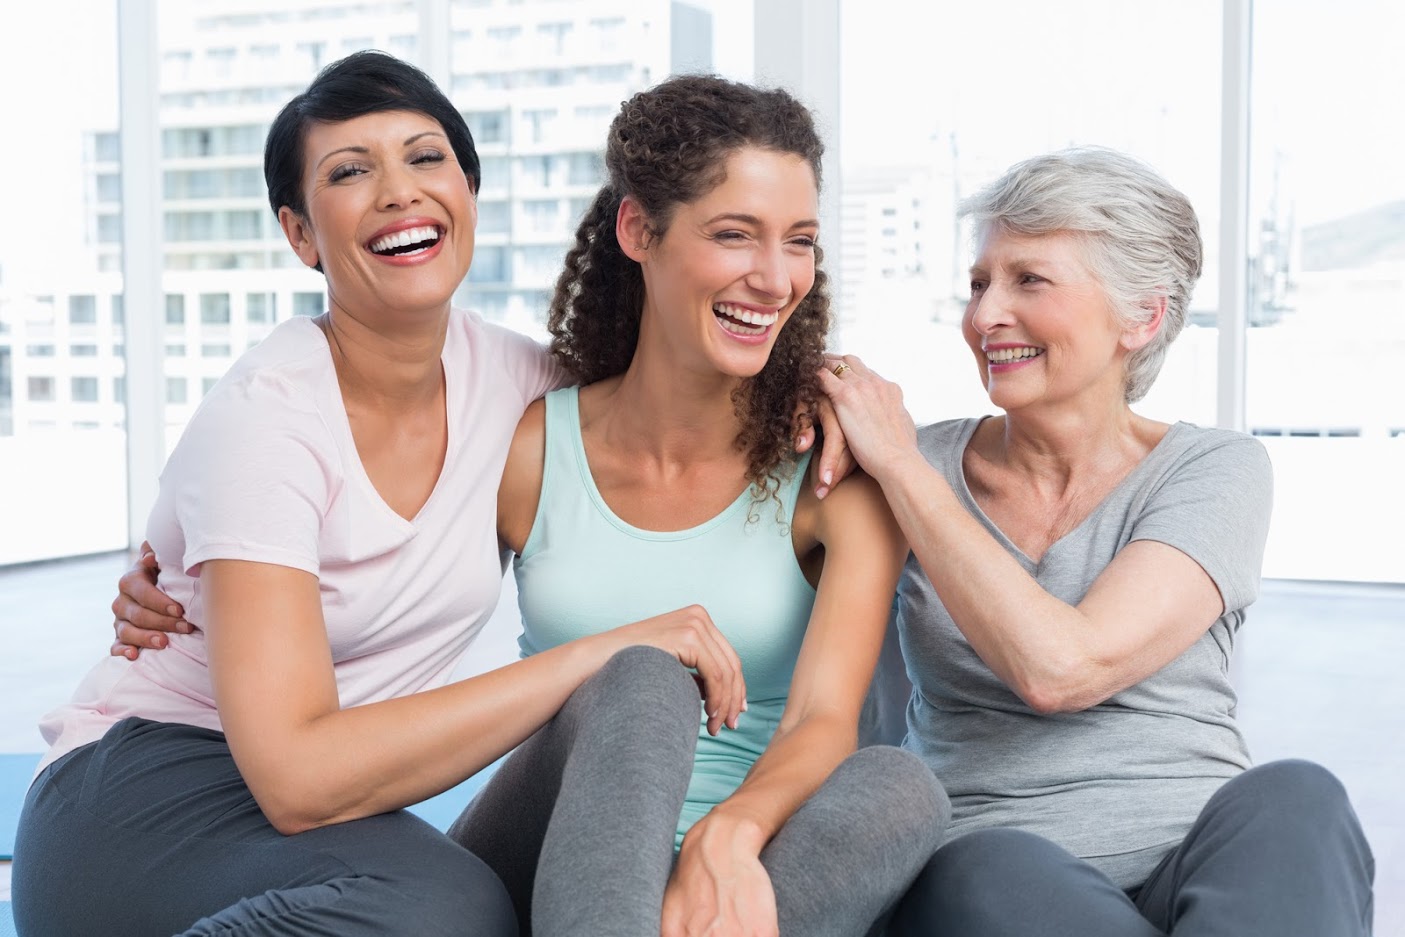 Three women of varying ages sitting together, smiling and embracing in a bright room.